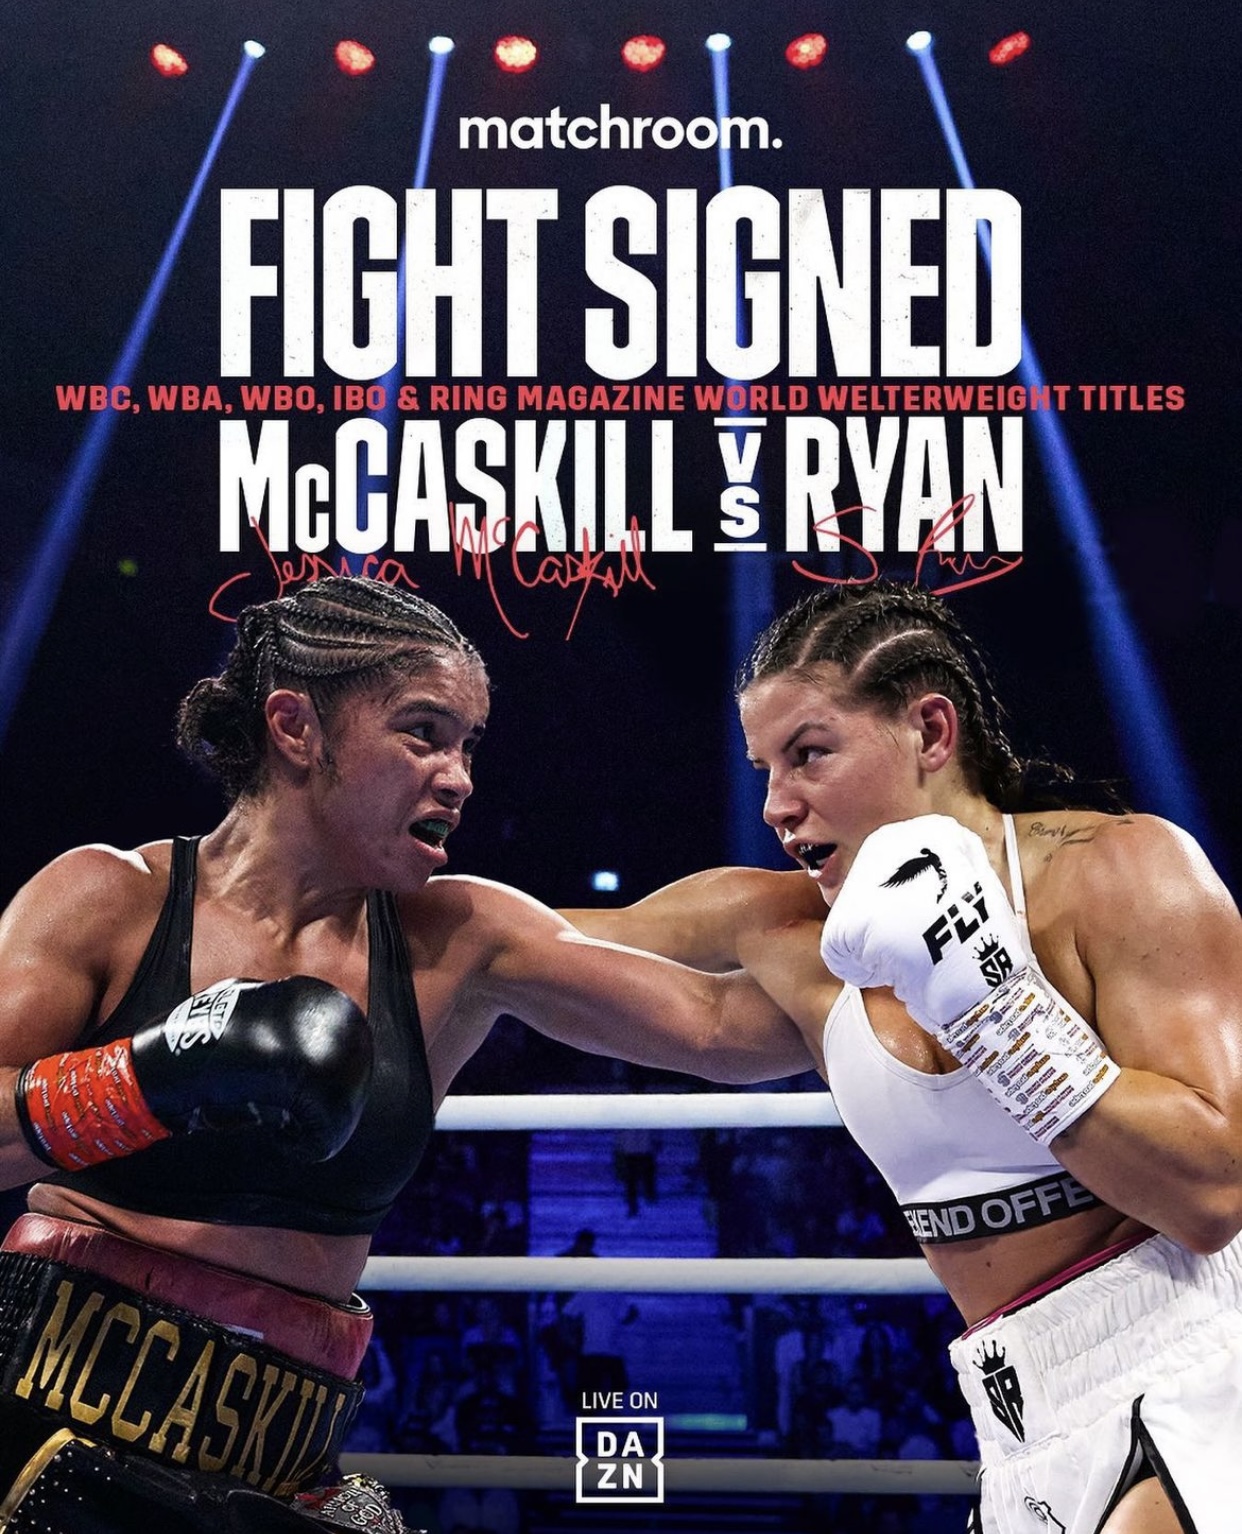 McCaskill and Ryan to unify at welterweight 